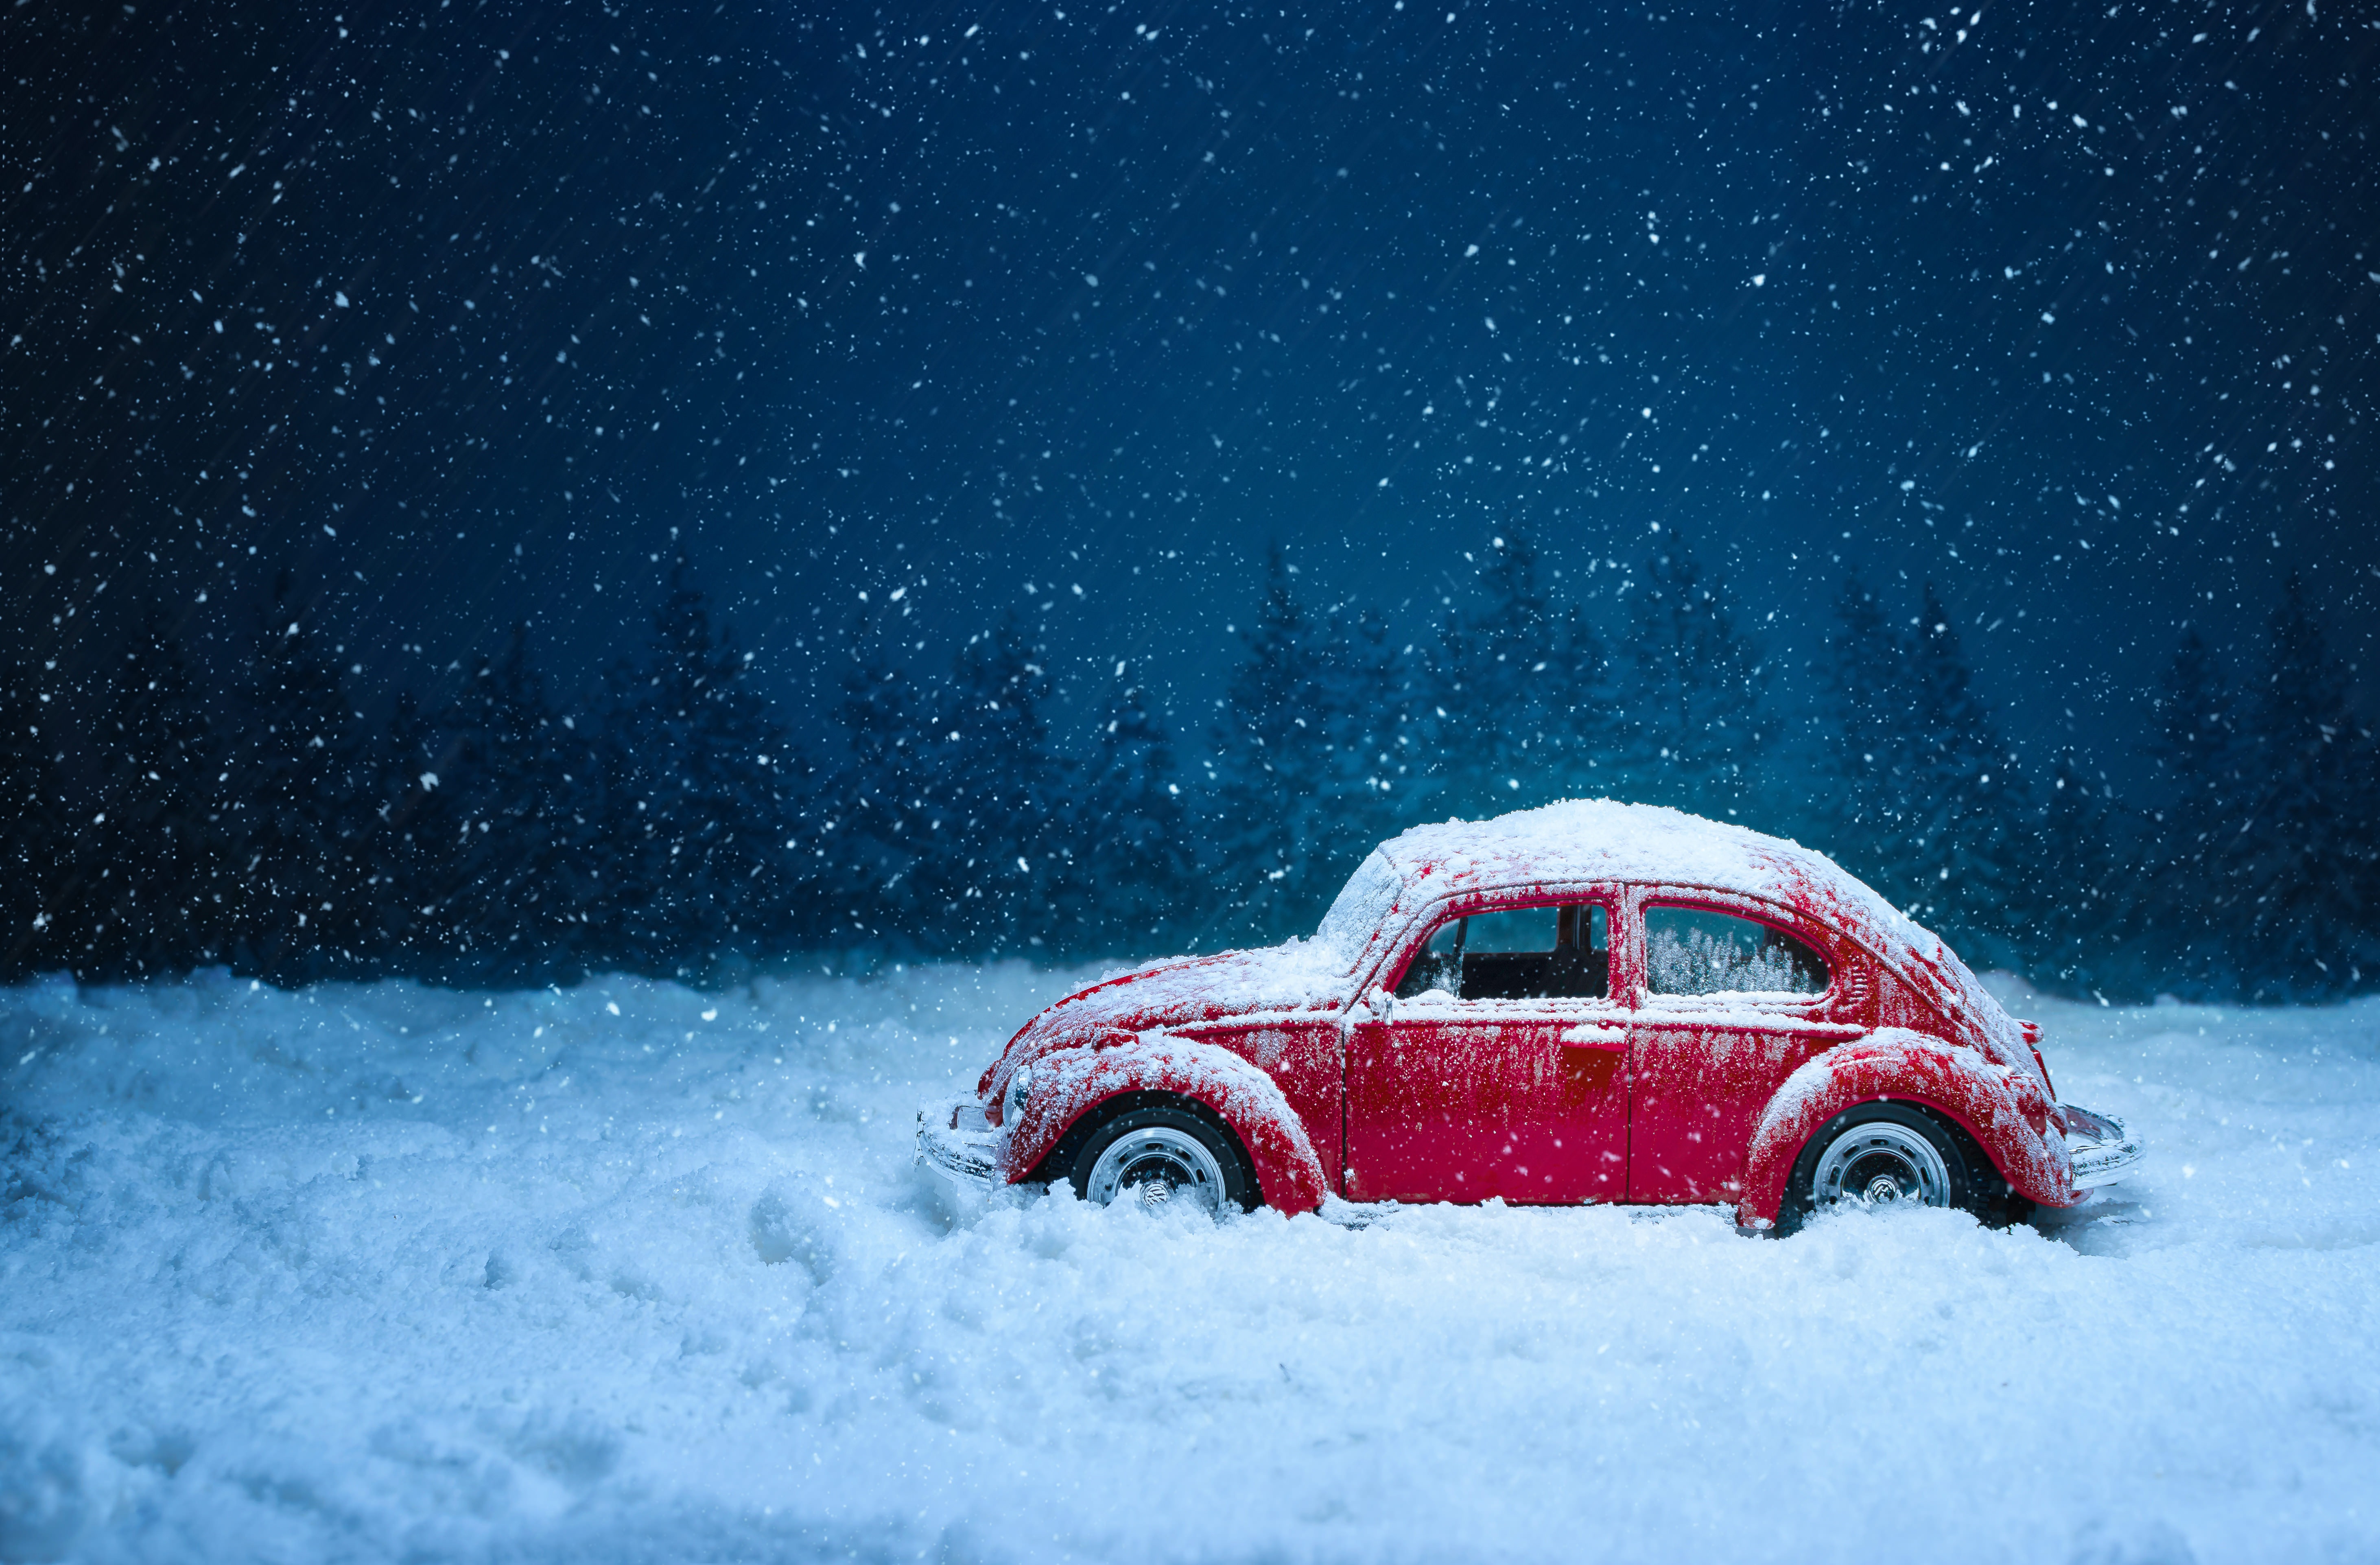 Toy VW Car Stuck in the Snow by Sangeeth Sangi